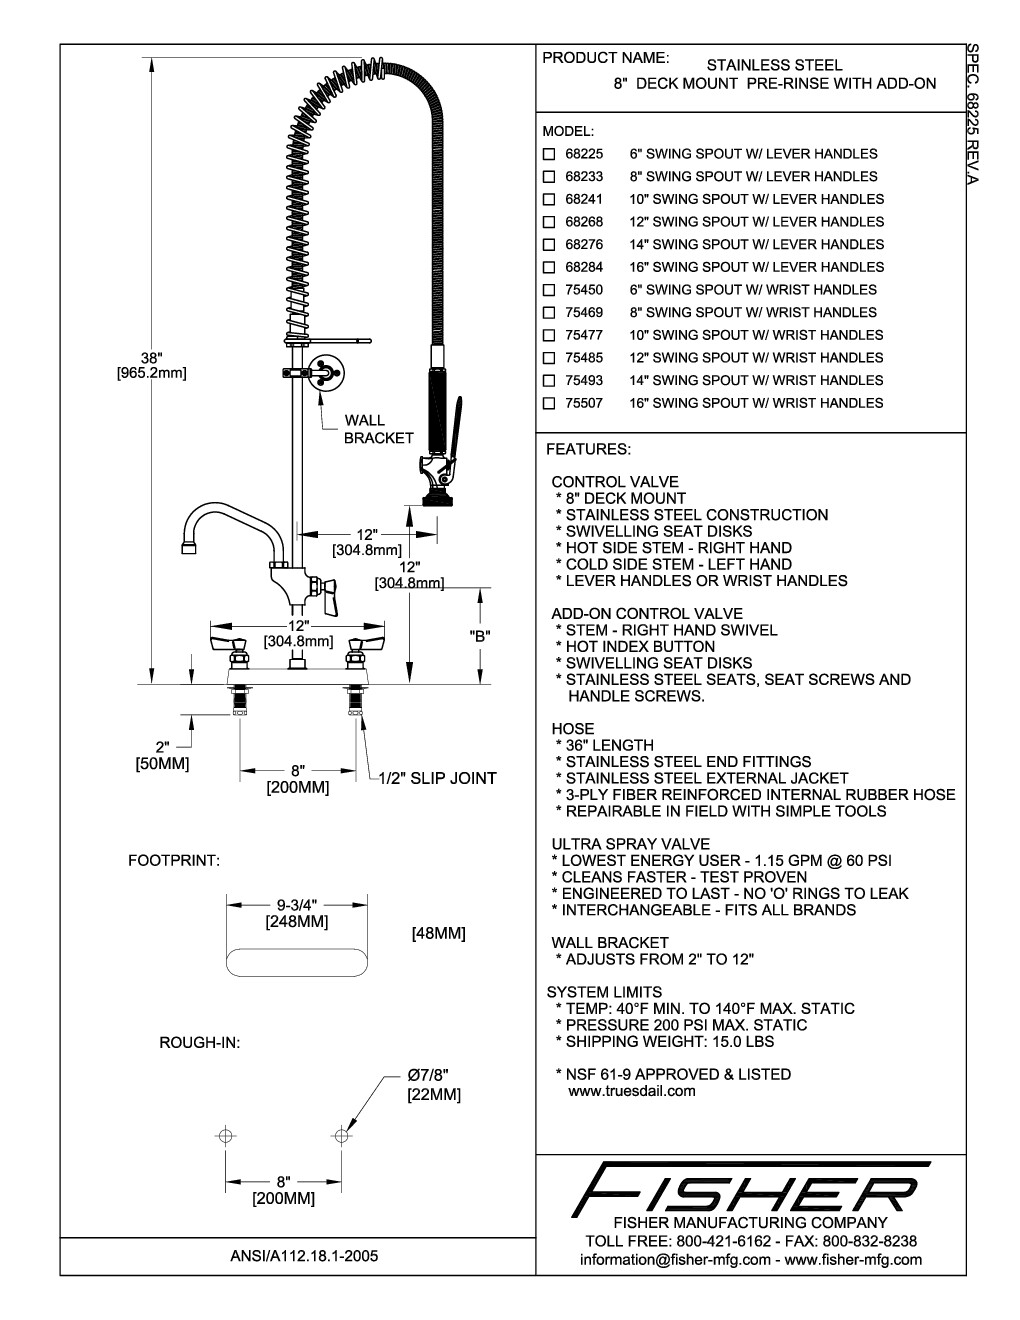 Fisher 68225 with Add On Faucet Pre-Rinse Faucet Assembly